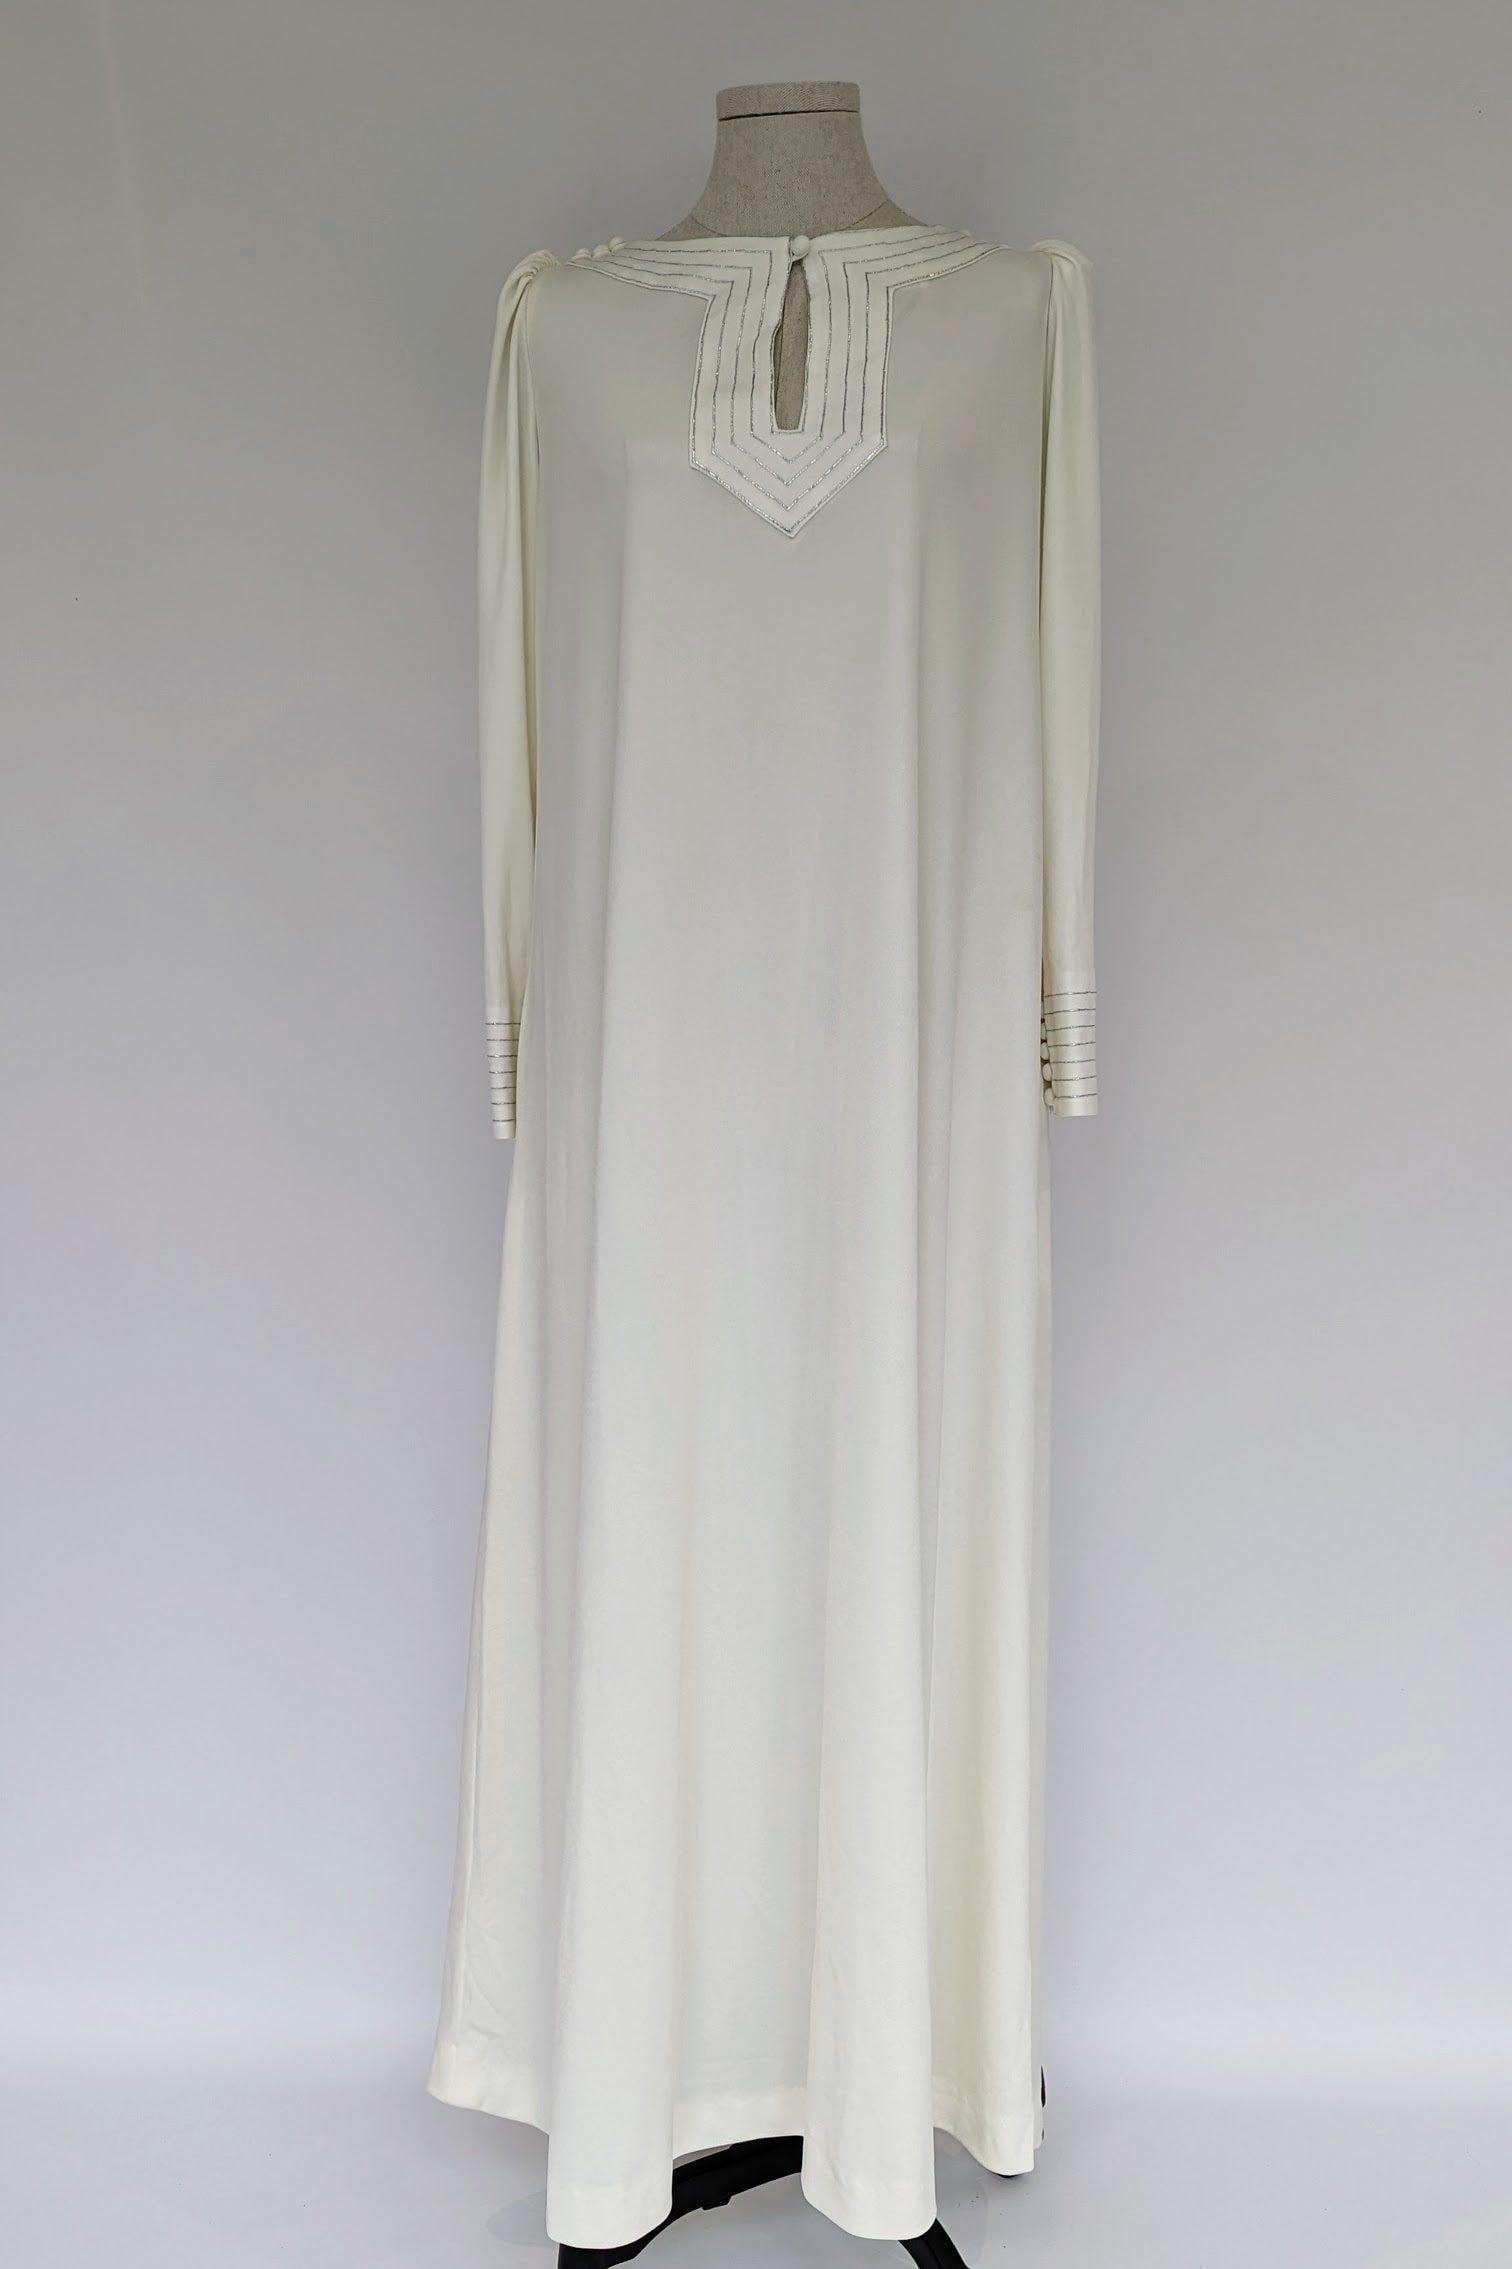 Long white and silver vintage dress